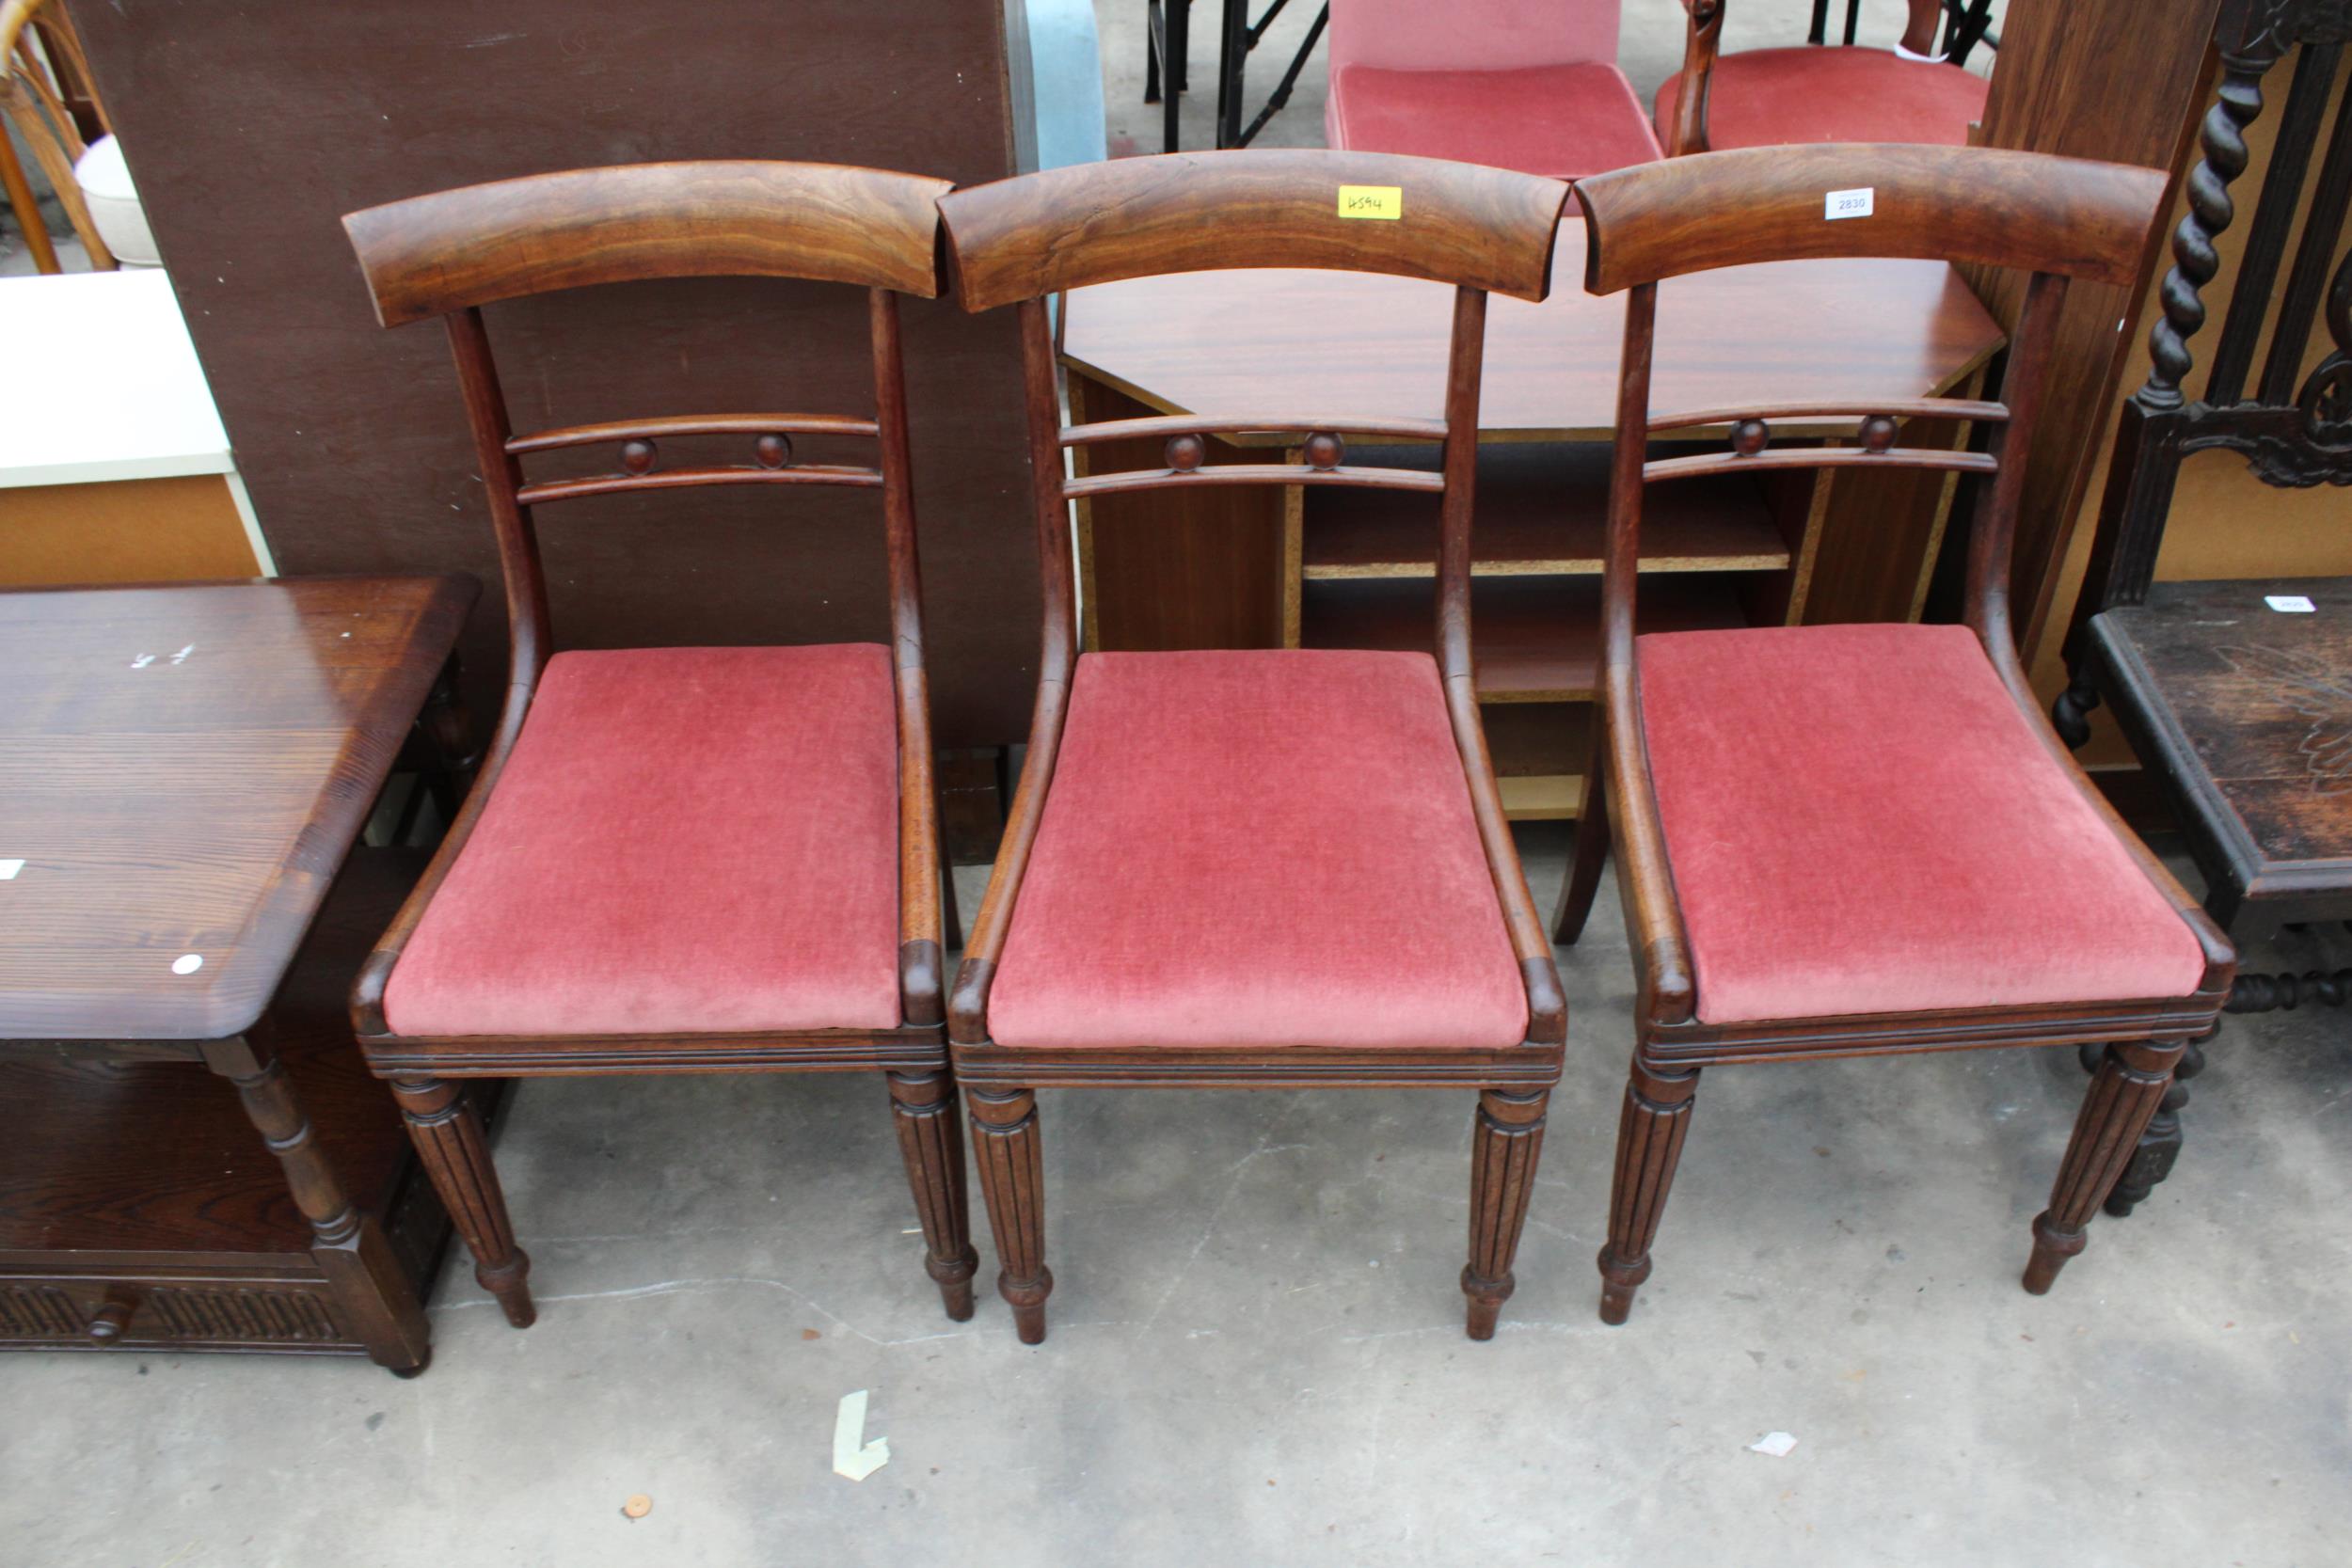 THREE VICTORIAN MAHOGANY DINING CHAIRS ON TURNED AND FLUTED LEGS